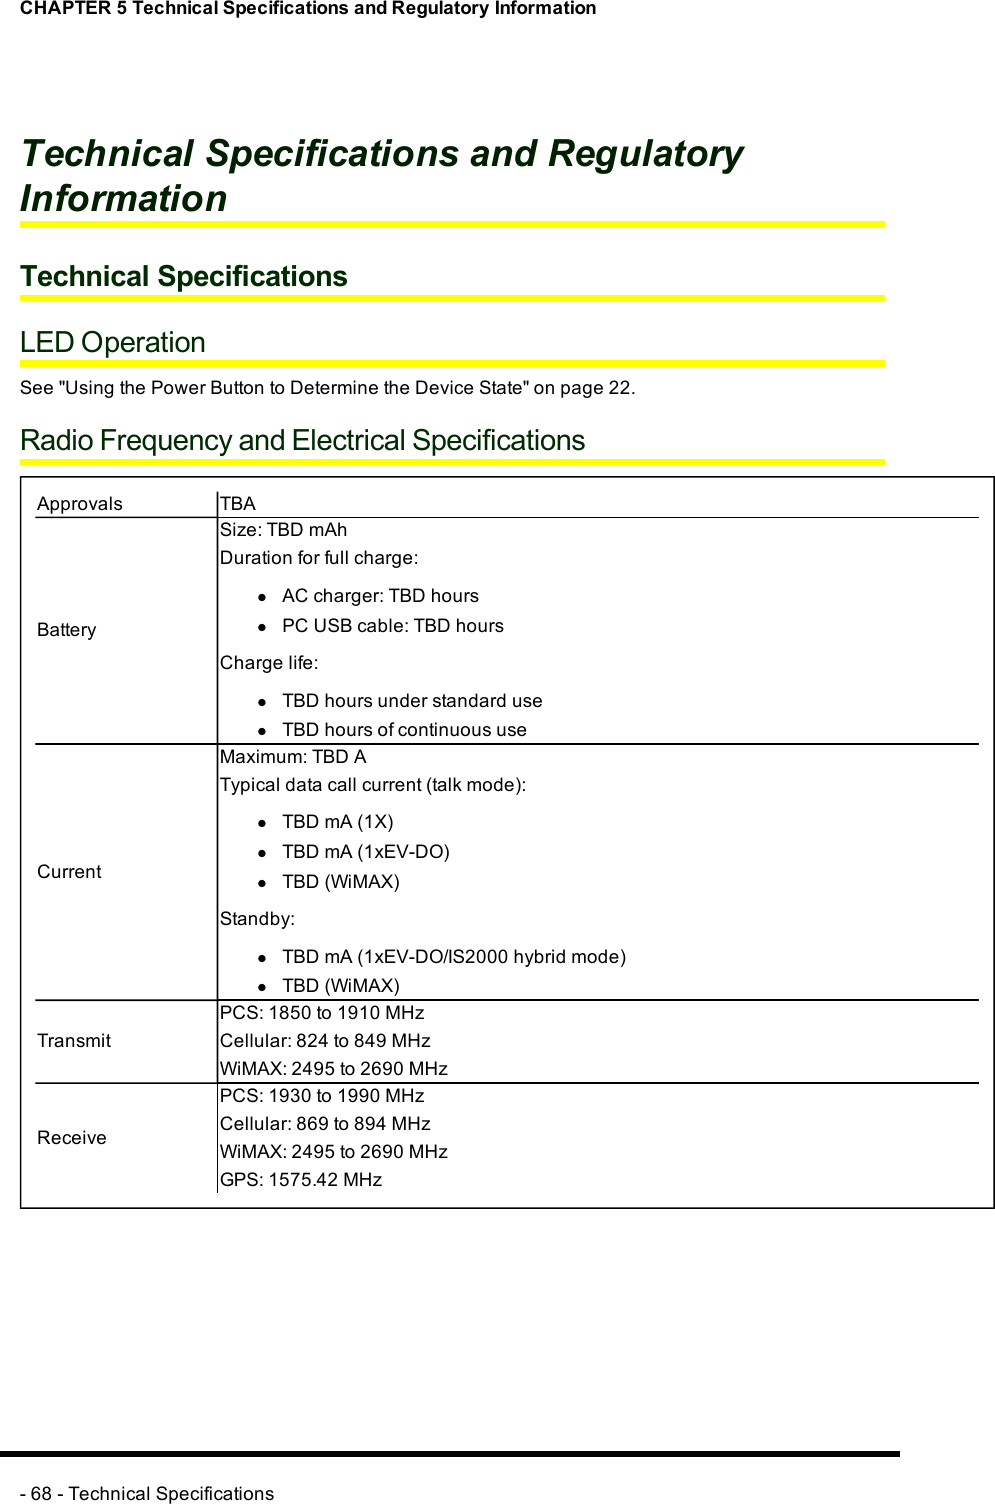 CHAPTER 5 Technical Specifications and Regulatory InformationTechnical Specifications and RegulatoryInformationTechnical SpecificationsLED OperationSee &quot;Using the Power Button to Determine the Device State&quot; on page 22.Radio Frequency and Electrical SpecificationsApprovals TBABatterySize:TBD mAhDuration for full charge:lACcharger:TBD hourslPCUSBcable:TBD hoursCharge life:lTBD hours under standard uselTBD hours of continuous useCurrentMaximum: TBD ATypical data call current (talk mode):lTBD mA (1X)lTBD mA (1xEV-DO)lTBD(WiMAX)Standby:lTBD mA (1xEV-DO/IS2000 hybrid mode)lTBD(WiMAX)TransmitPCS: 1850 to 1910 MHzCellular: 824 to 849 MHzWiMAX: 2495 to 2690 MHzReceivePCS: 1930 to 1990 MHzCellular: 869 to 894 MHzWiMAX: 2495 to 2690 MHzGPS: 1575.42 MHz- 68 - Technical Specifications